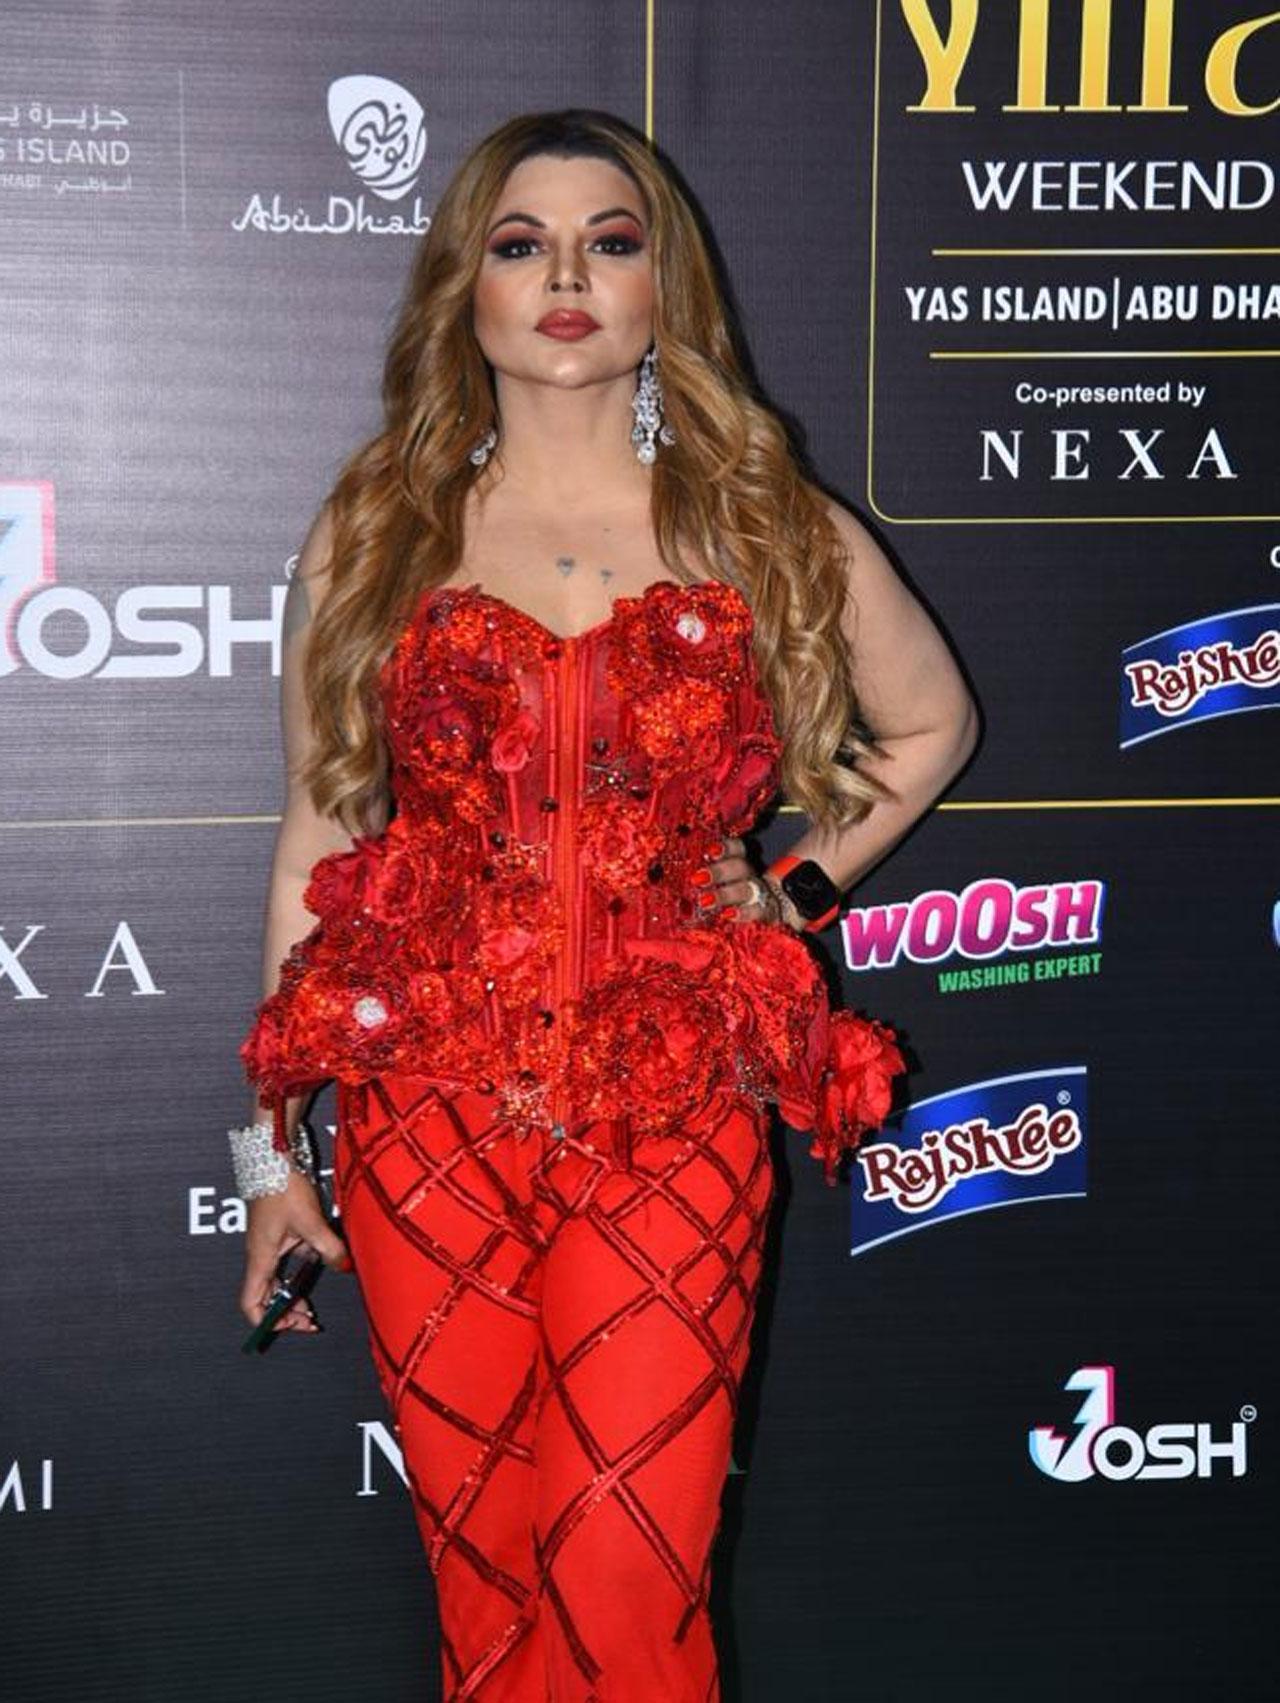 Rakhi Sawant was also spotted at the green carpet in a red dress